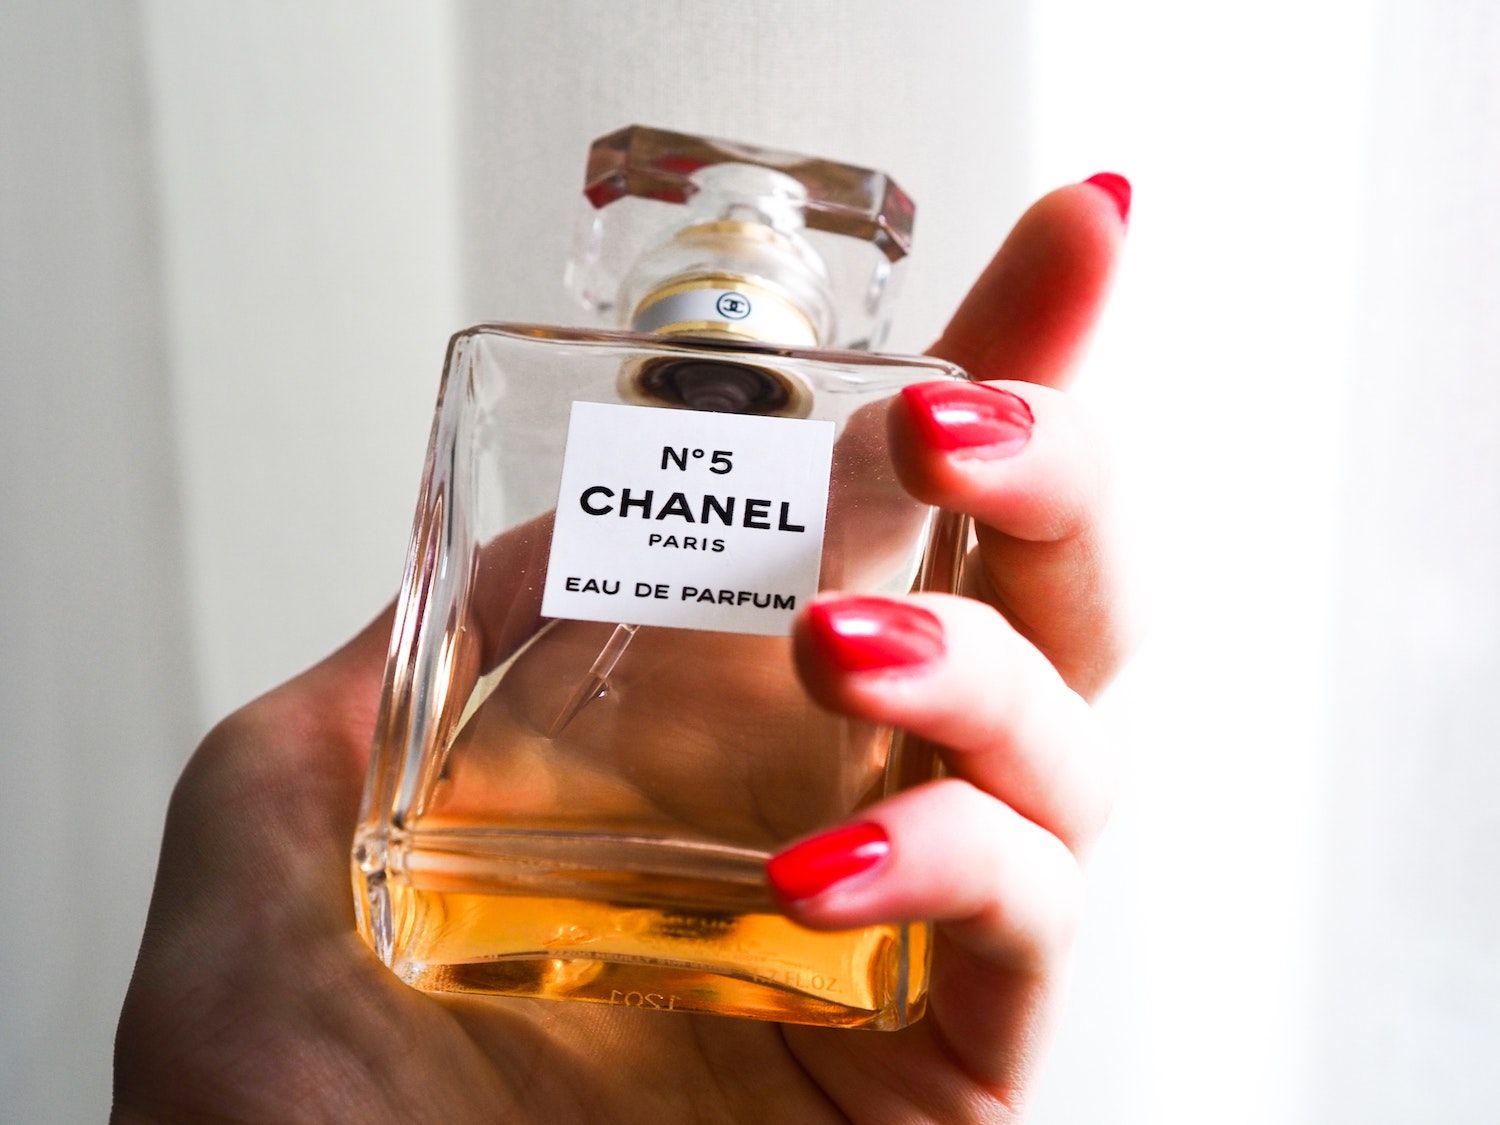 How Chanel No 5 remains the world's most popular perfume 100 years on